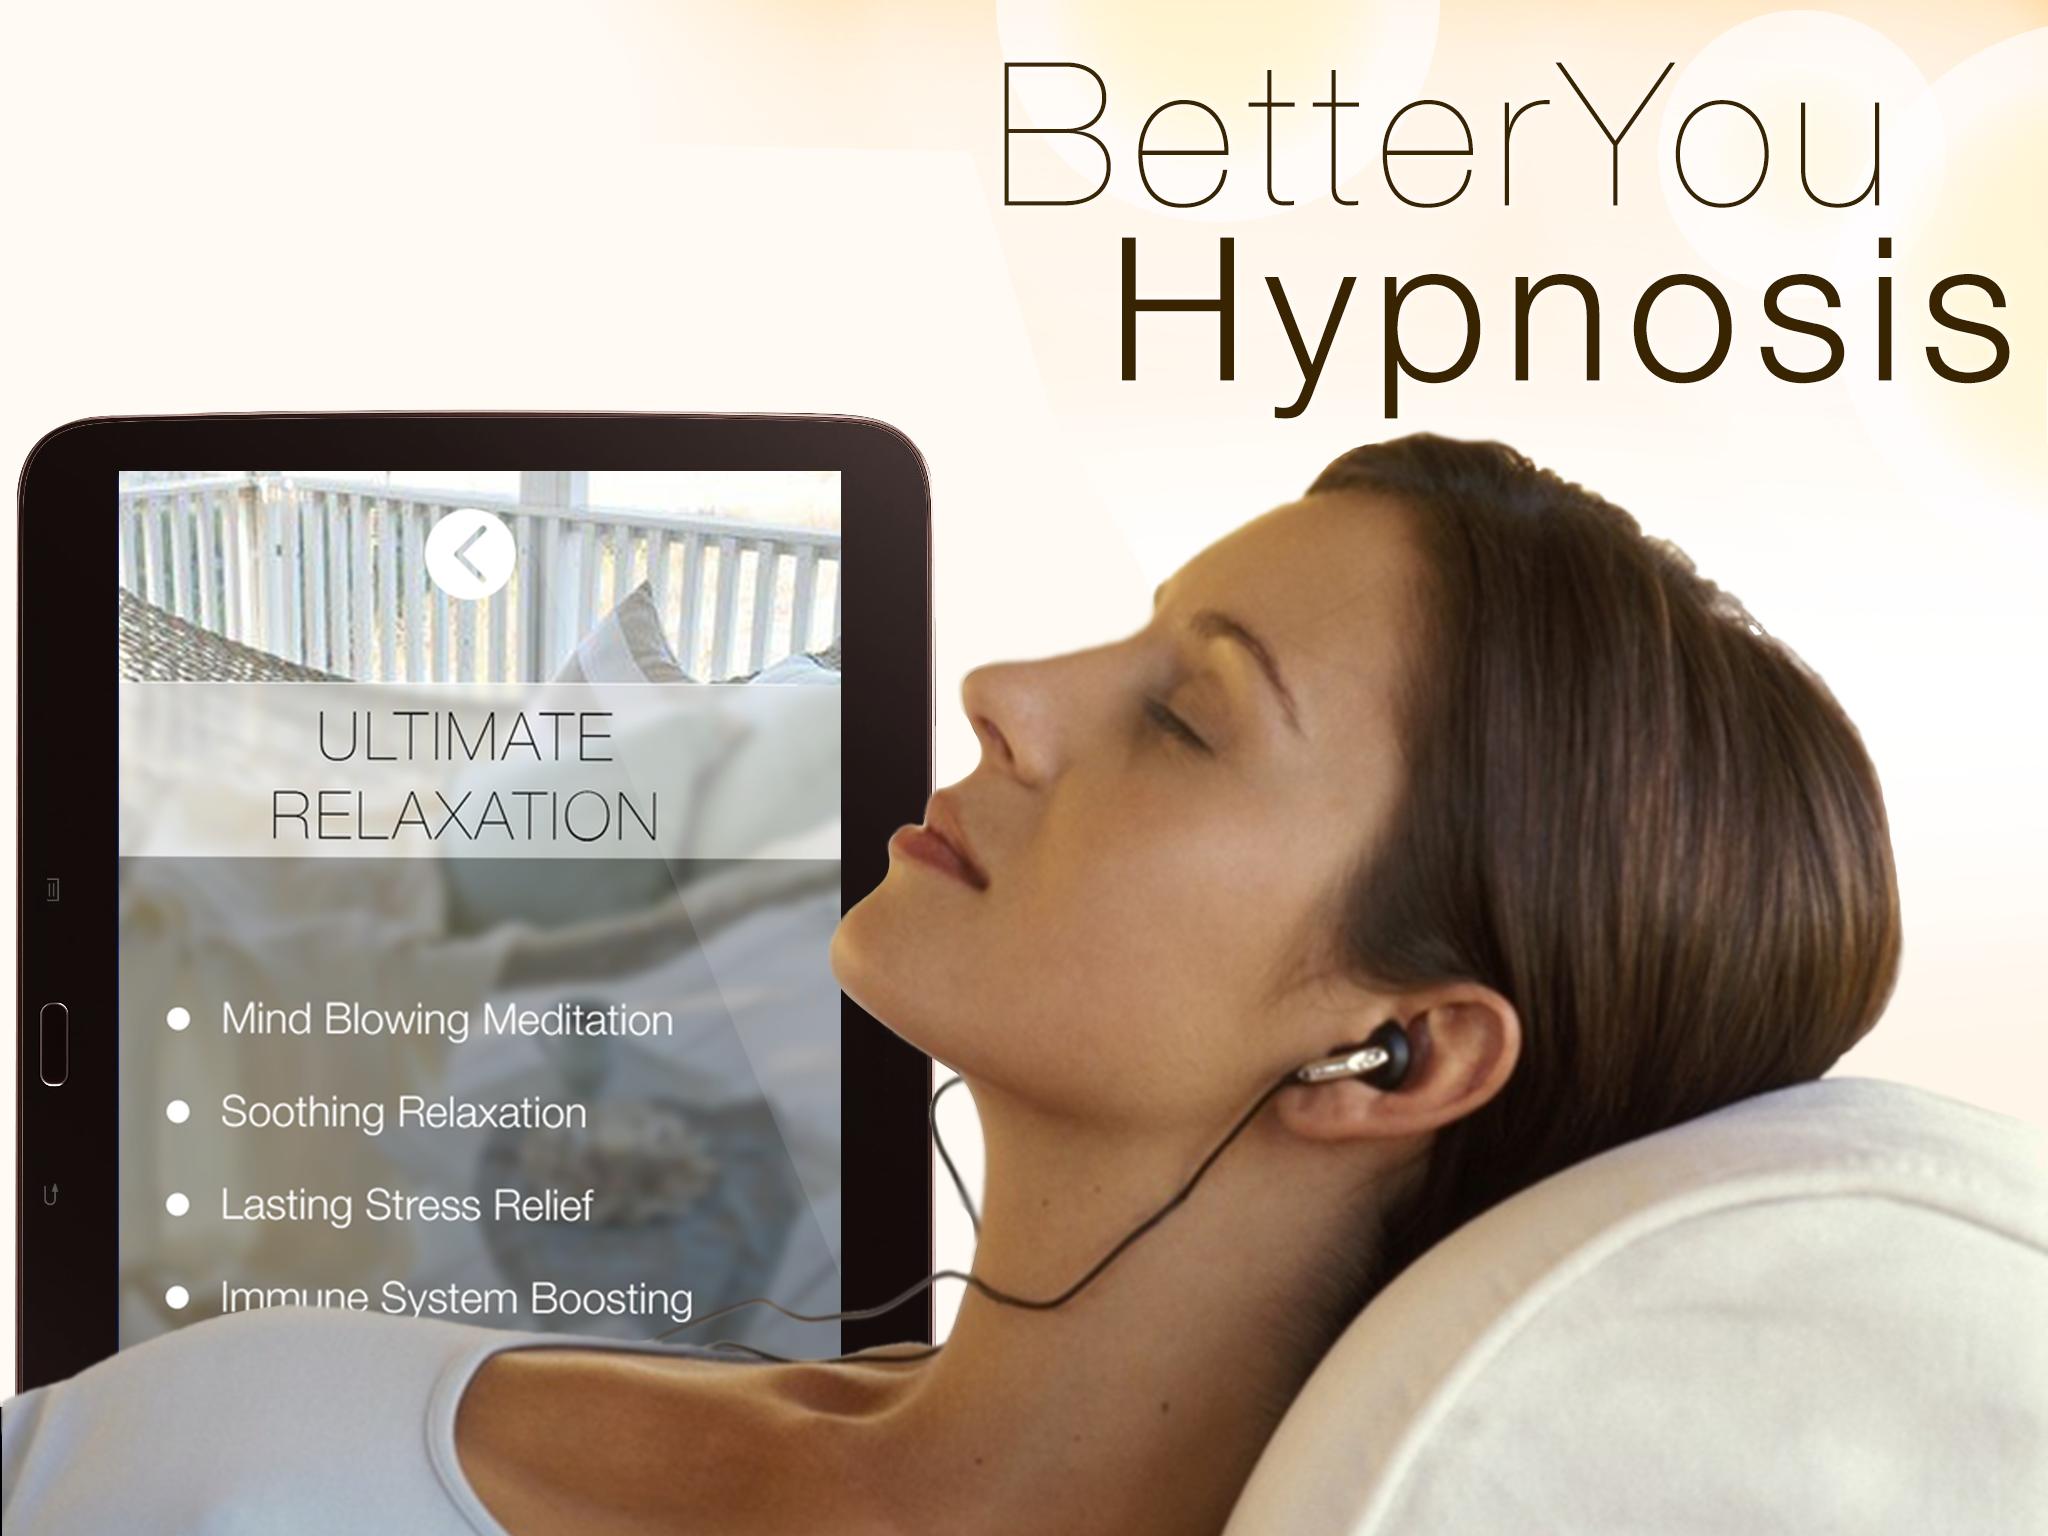 How to capture them with hypnosis